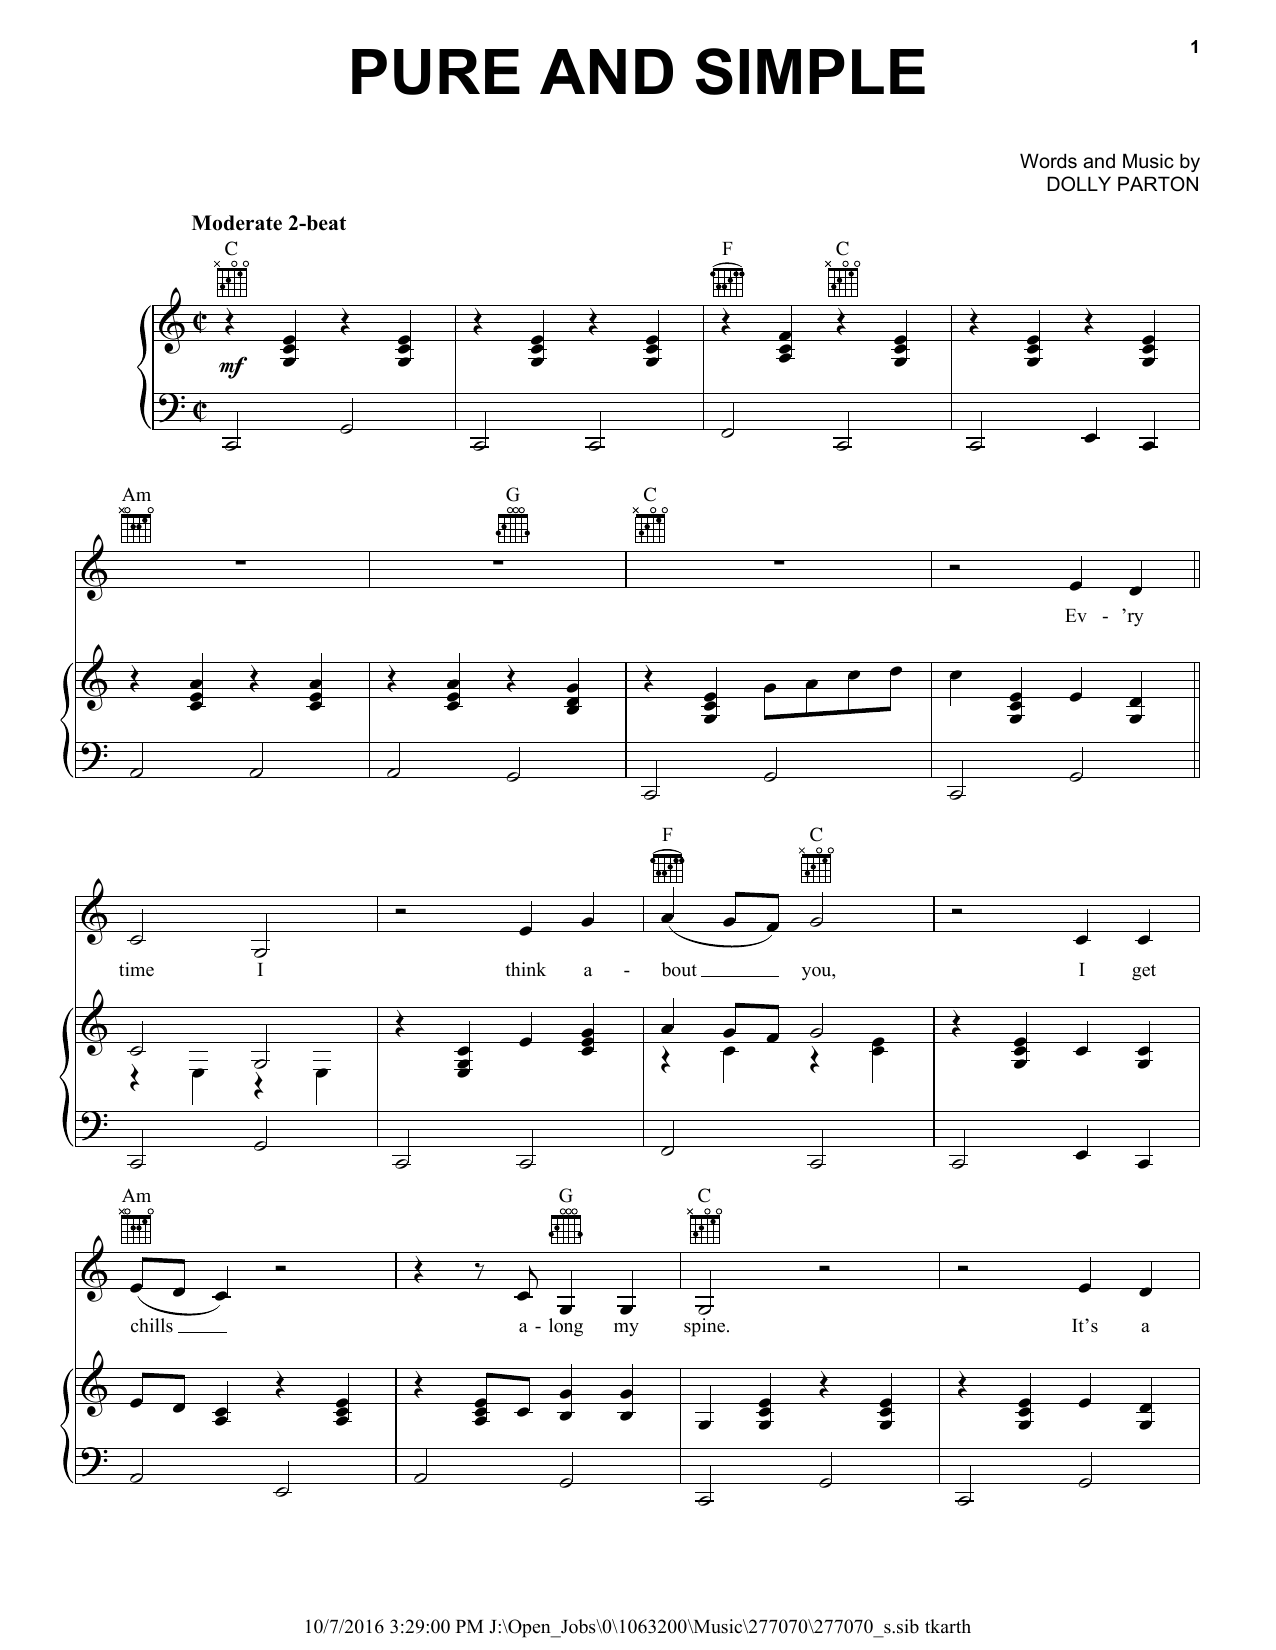 Download Dolly Parton Pure And Simple Sheet Music